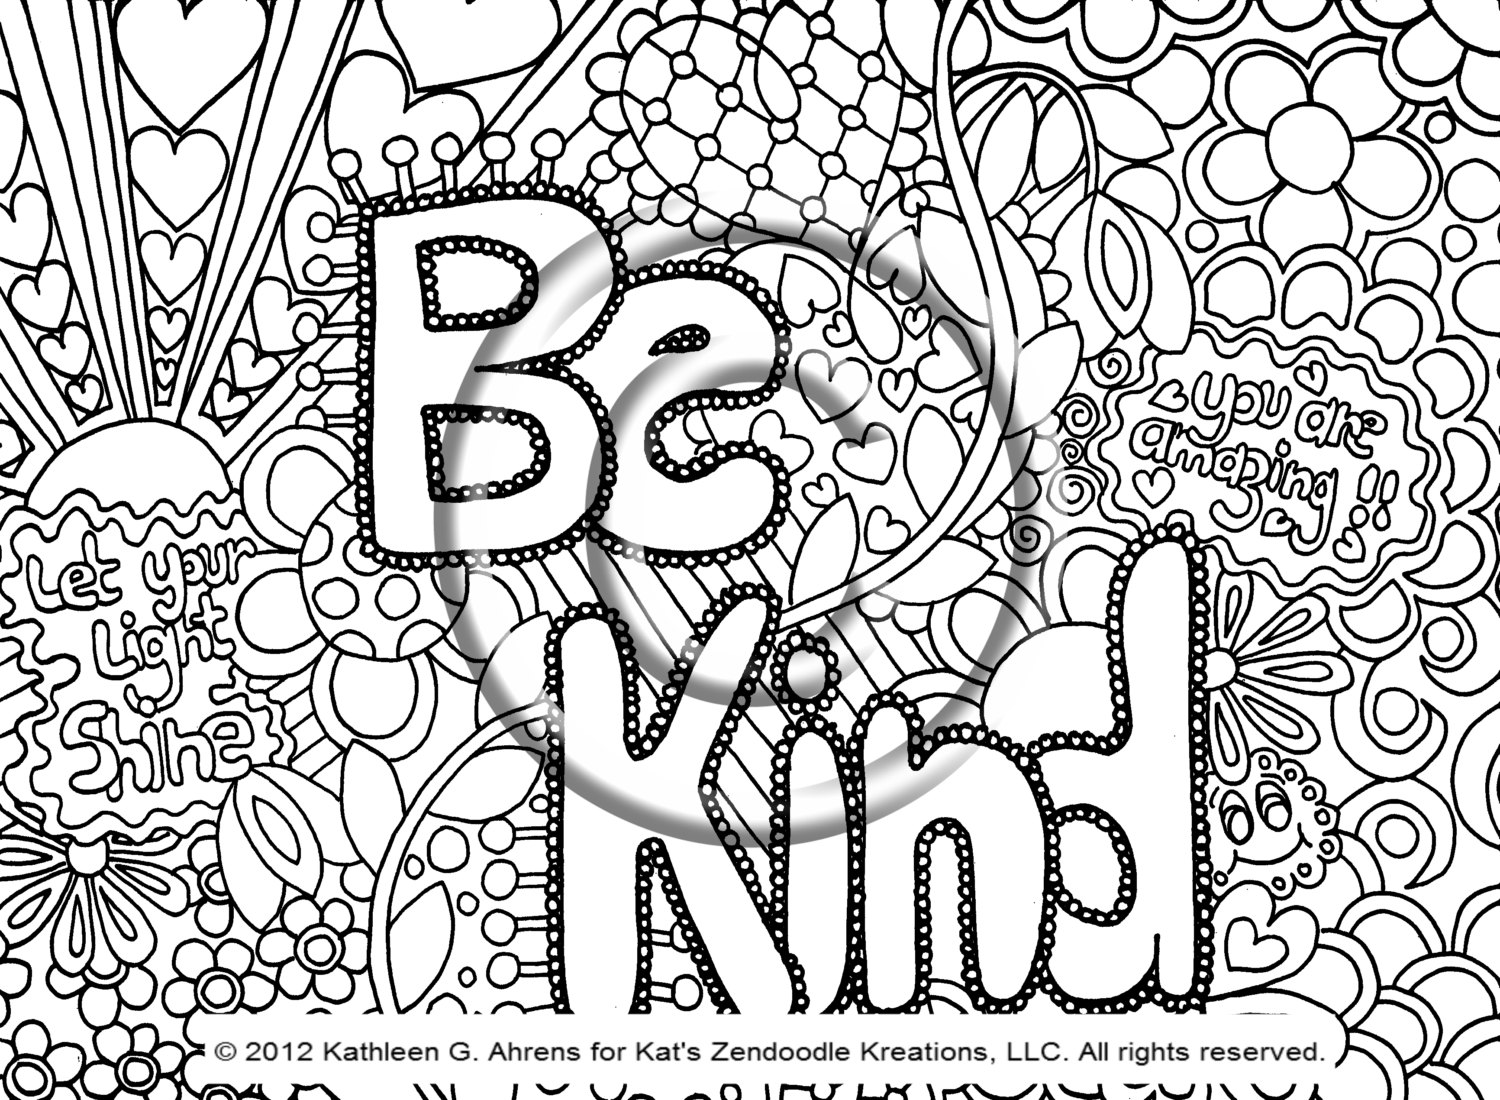 Psychedelic coloring pages to download and print for free